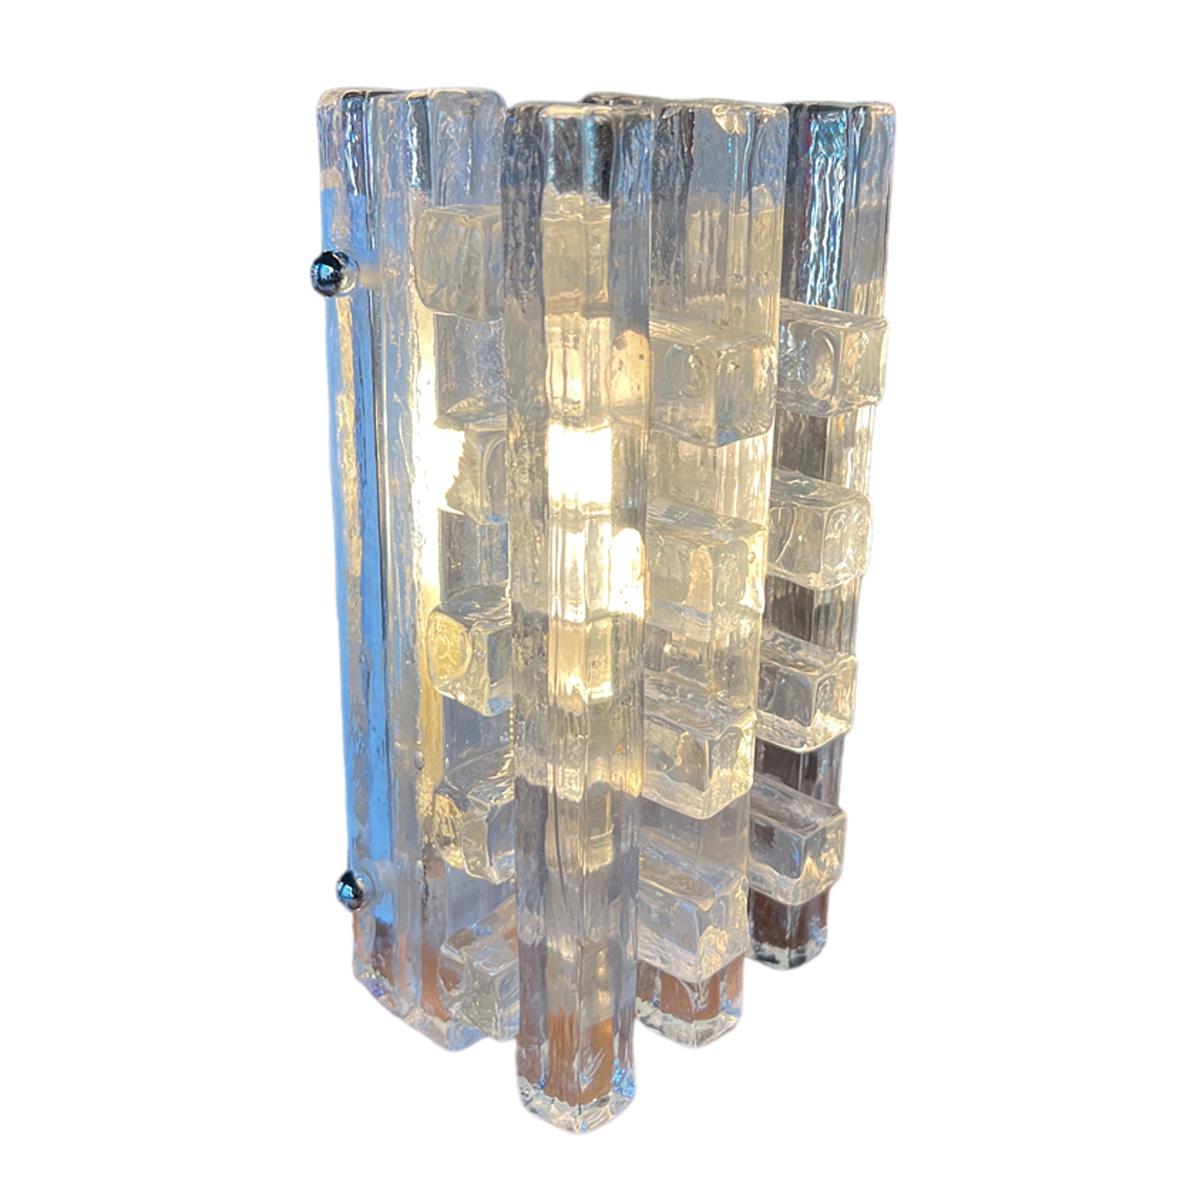 Mid-Century Brutalist Wall Sconce by Albano Poli for Poliarte, 1970
This wall sconce embodies the essence of the 1960s-1070s. It features approximately twenty stacked Murano glass rectangles of various sizes, all transparent yet textured, creating a